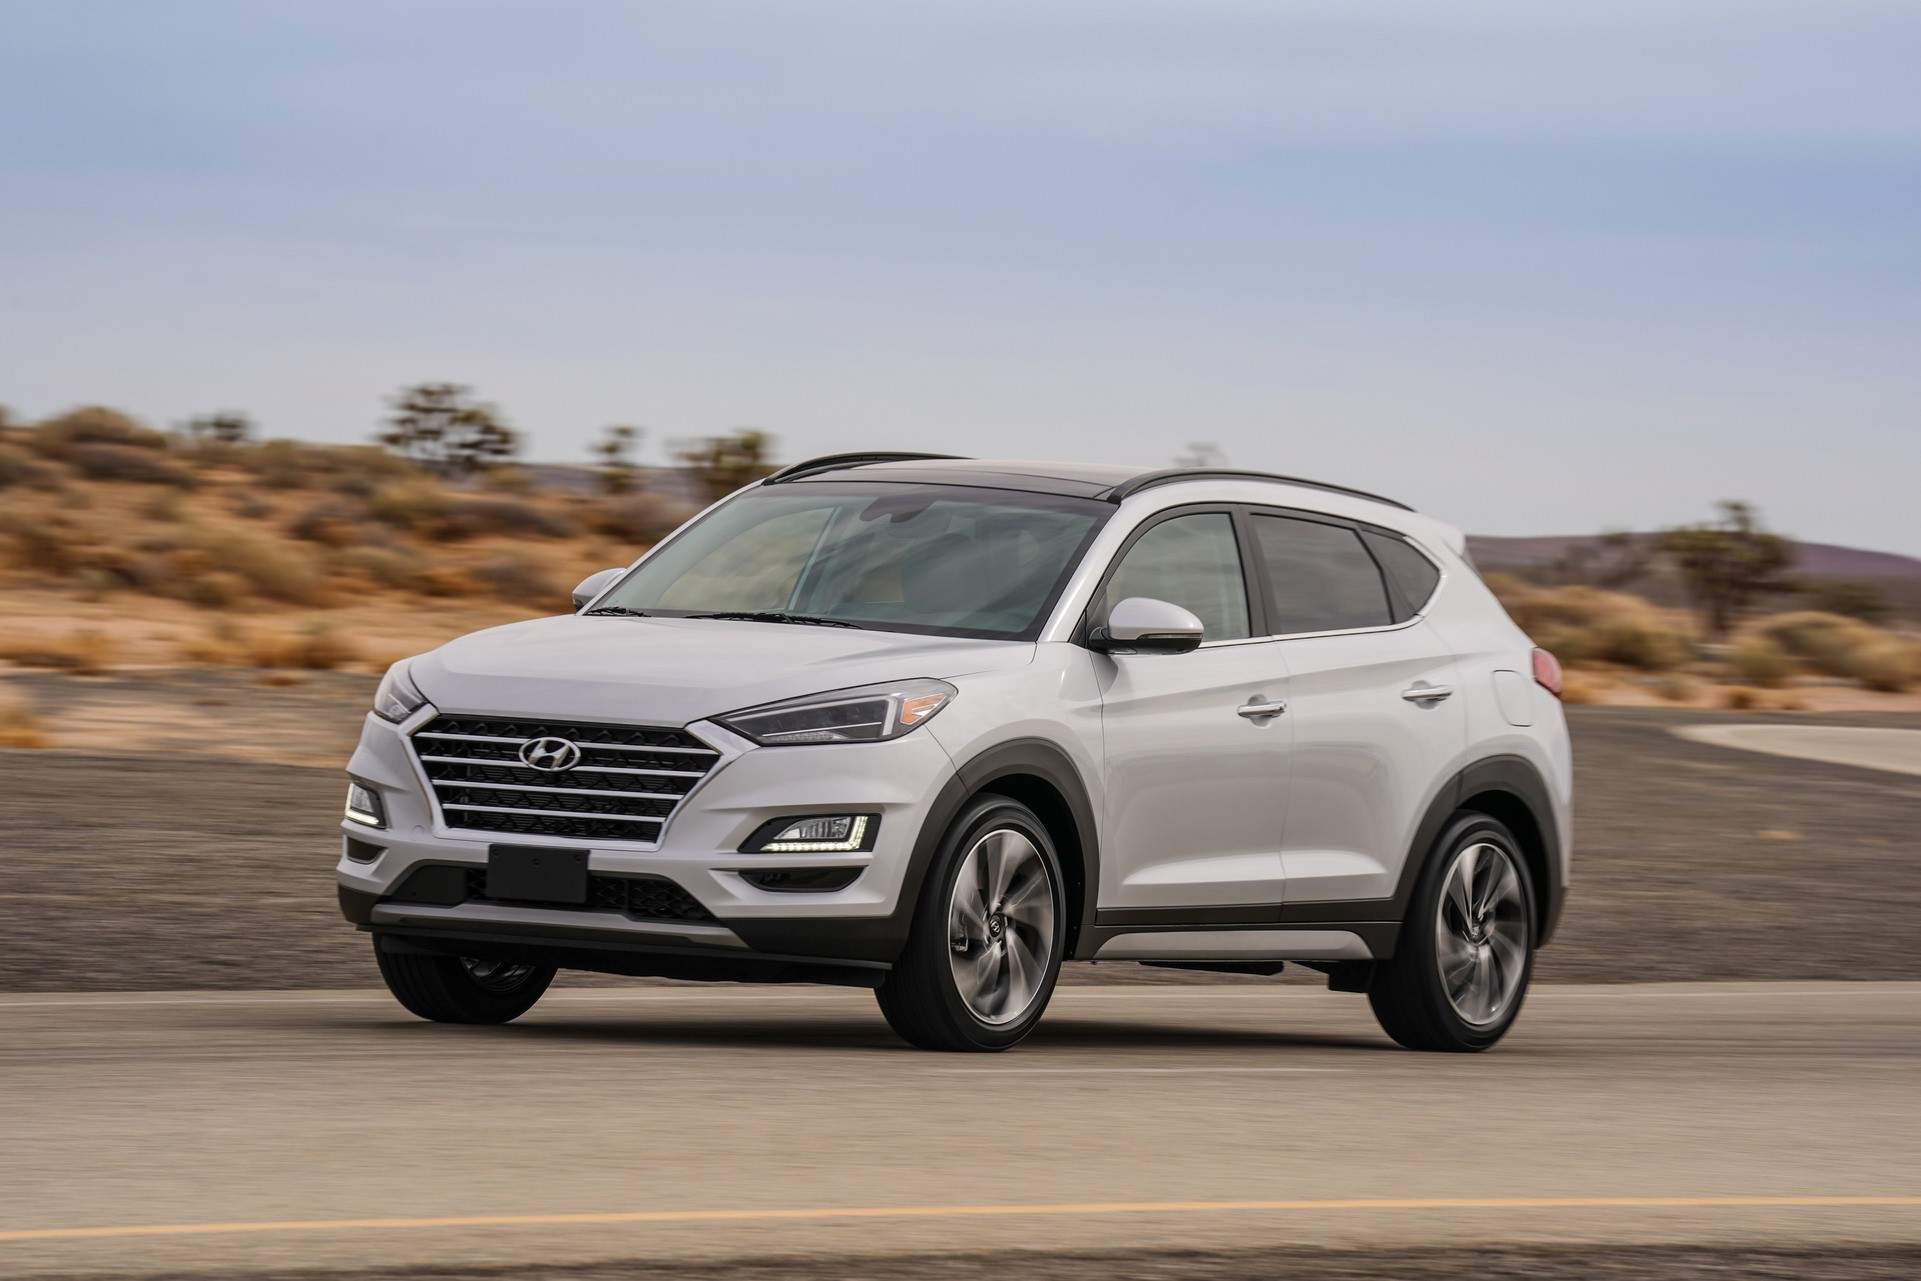 2019 Hyundai Tucson Debuts With Refreshed Face, Drops 1.6